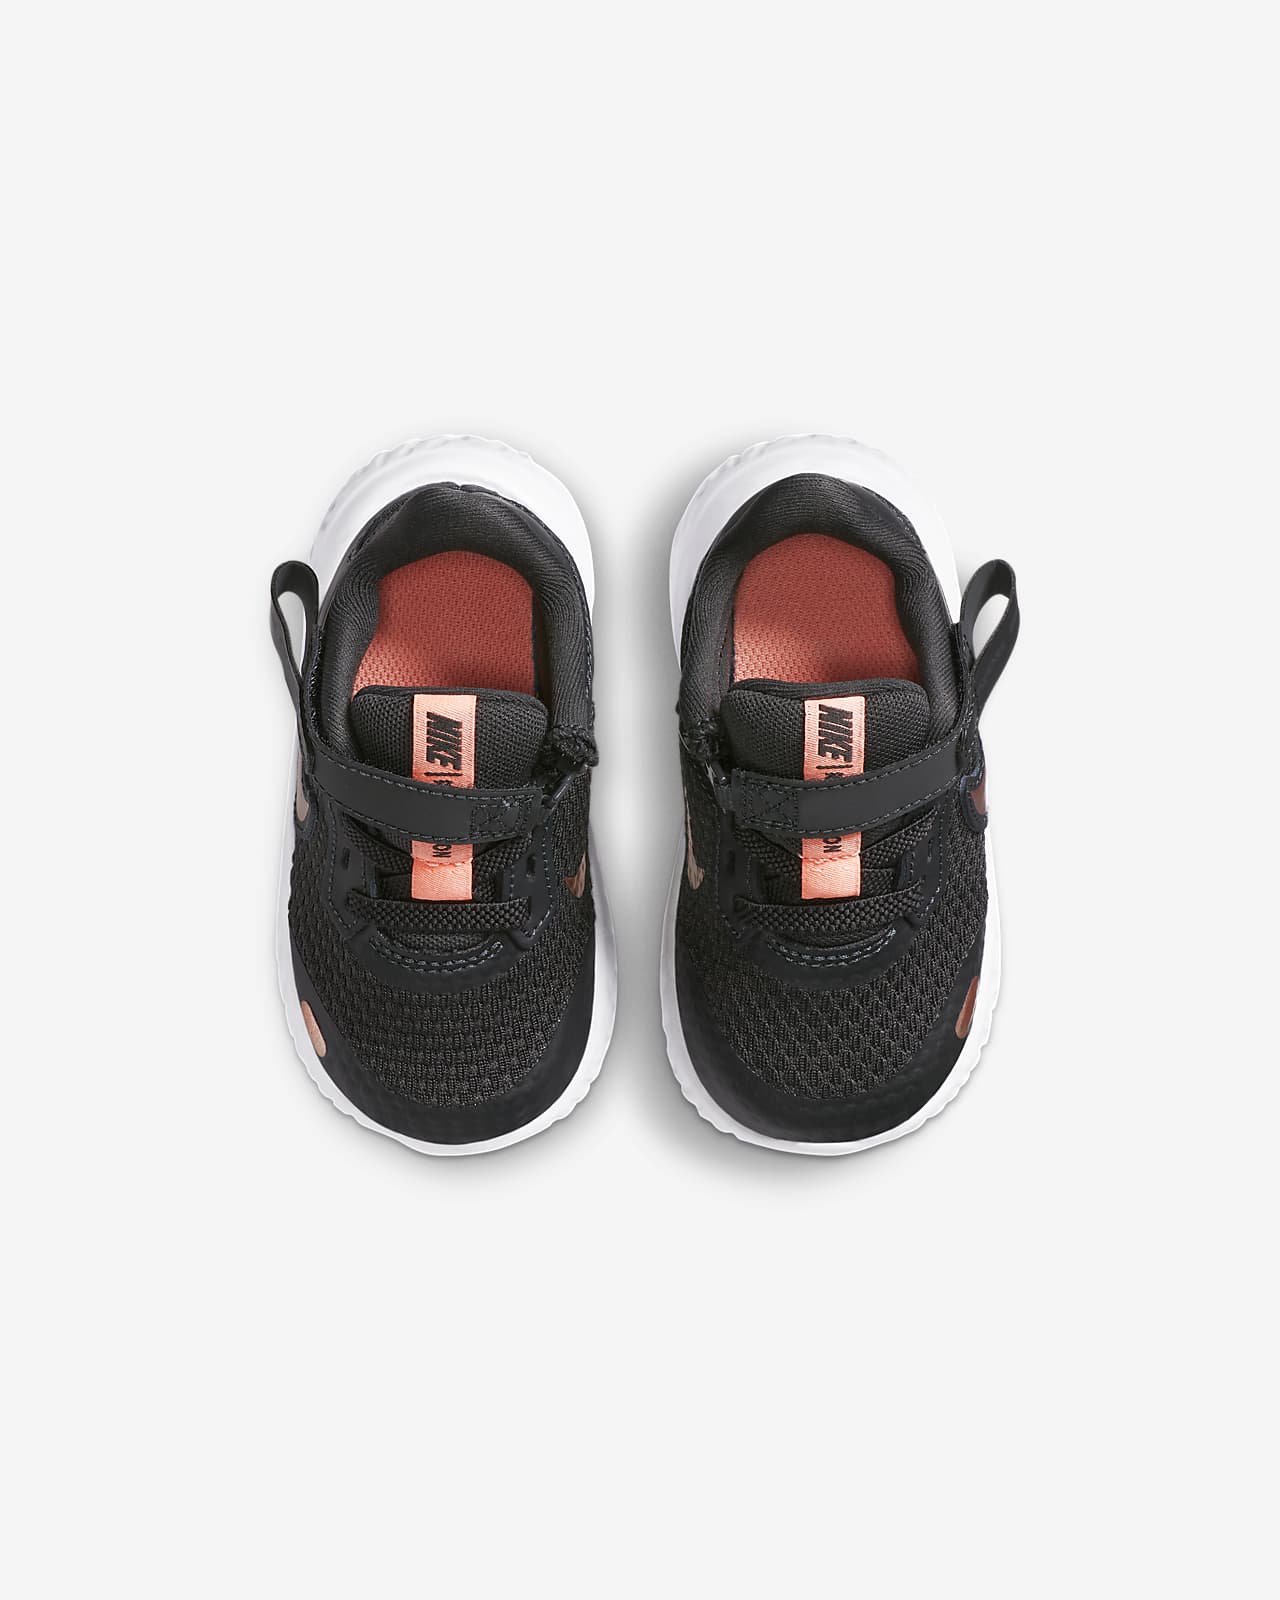 nike baby and toddler